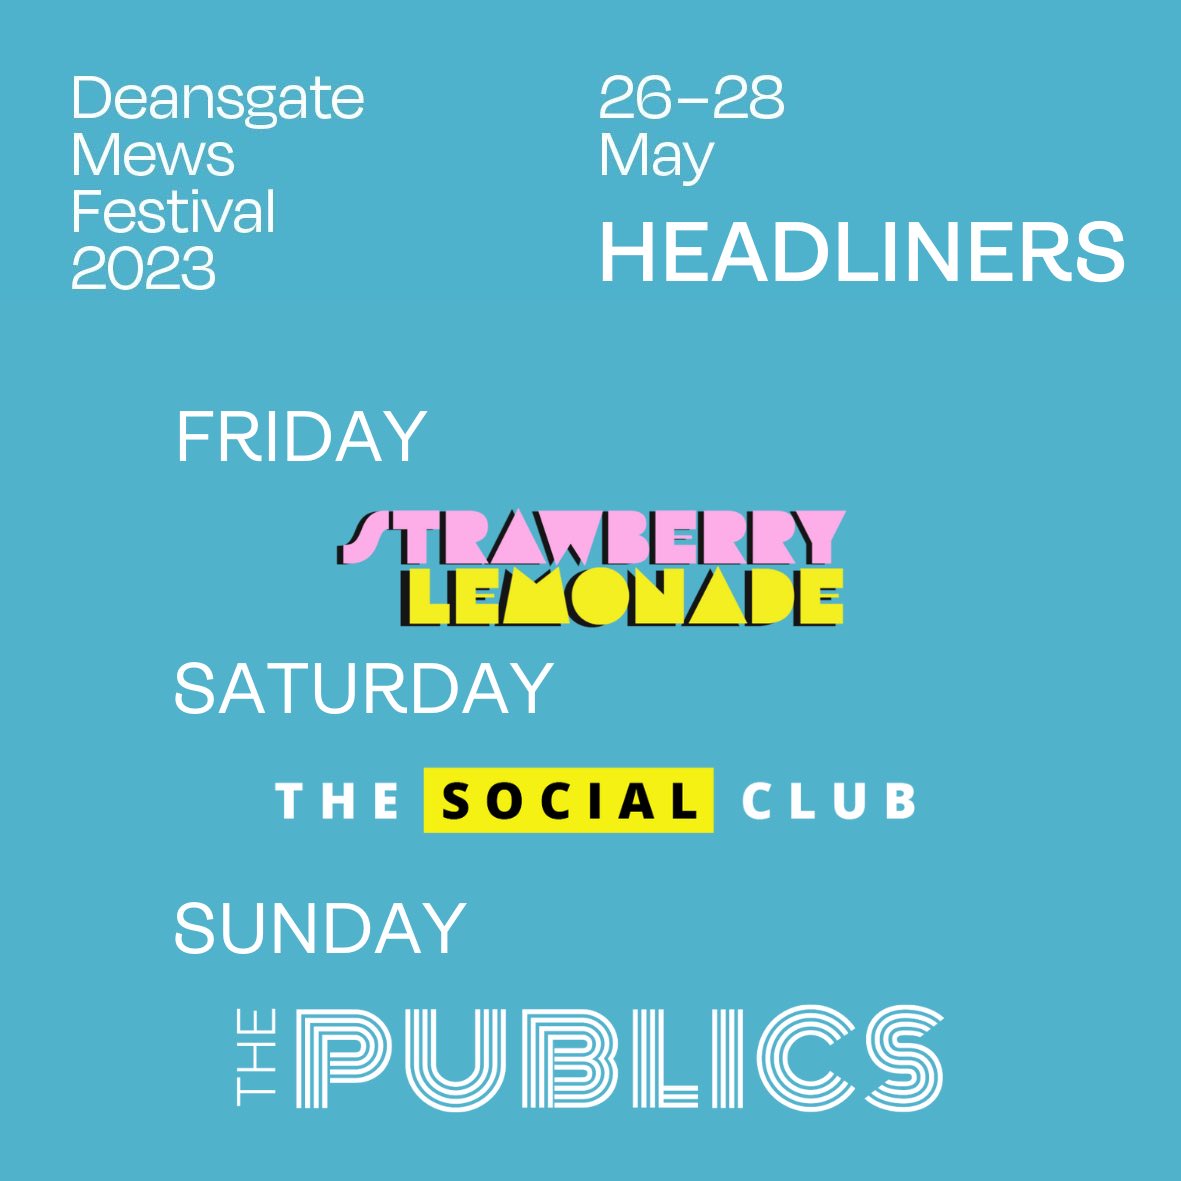 GET IINNNN!!!!! We're headlining the Deansgate Mews festival on the Saturday night 27th of May🫠Going to be a megah one so make sure you come down fer it‼️😵‍💫 @LionsDenMcr
@GNWManchester 
@districtrecords 
@DeansgateMews 
@mcronemedia 
@ManchesterRadio